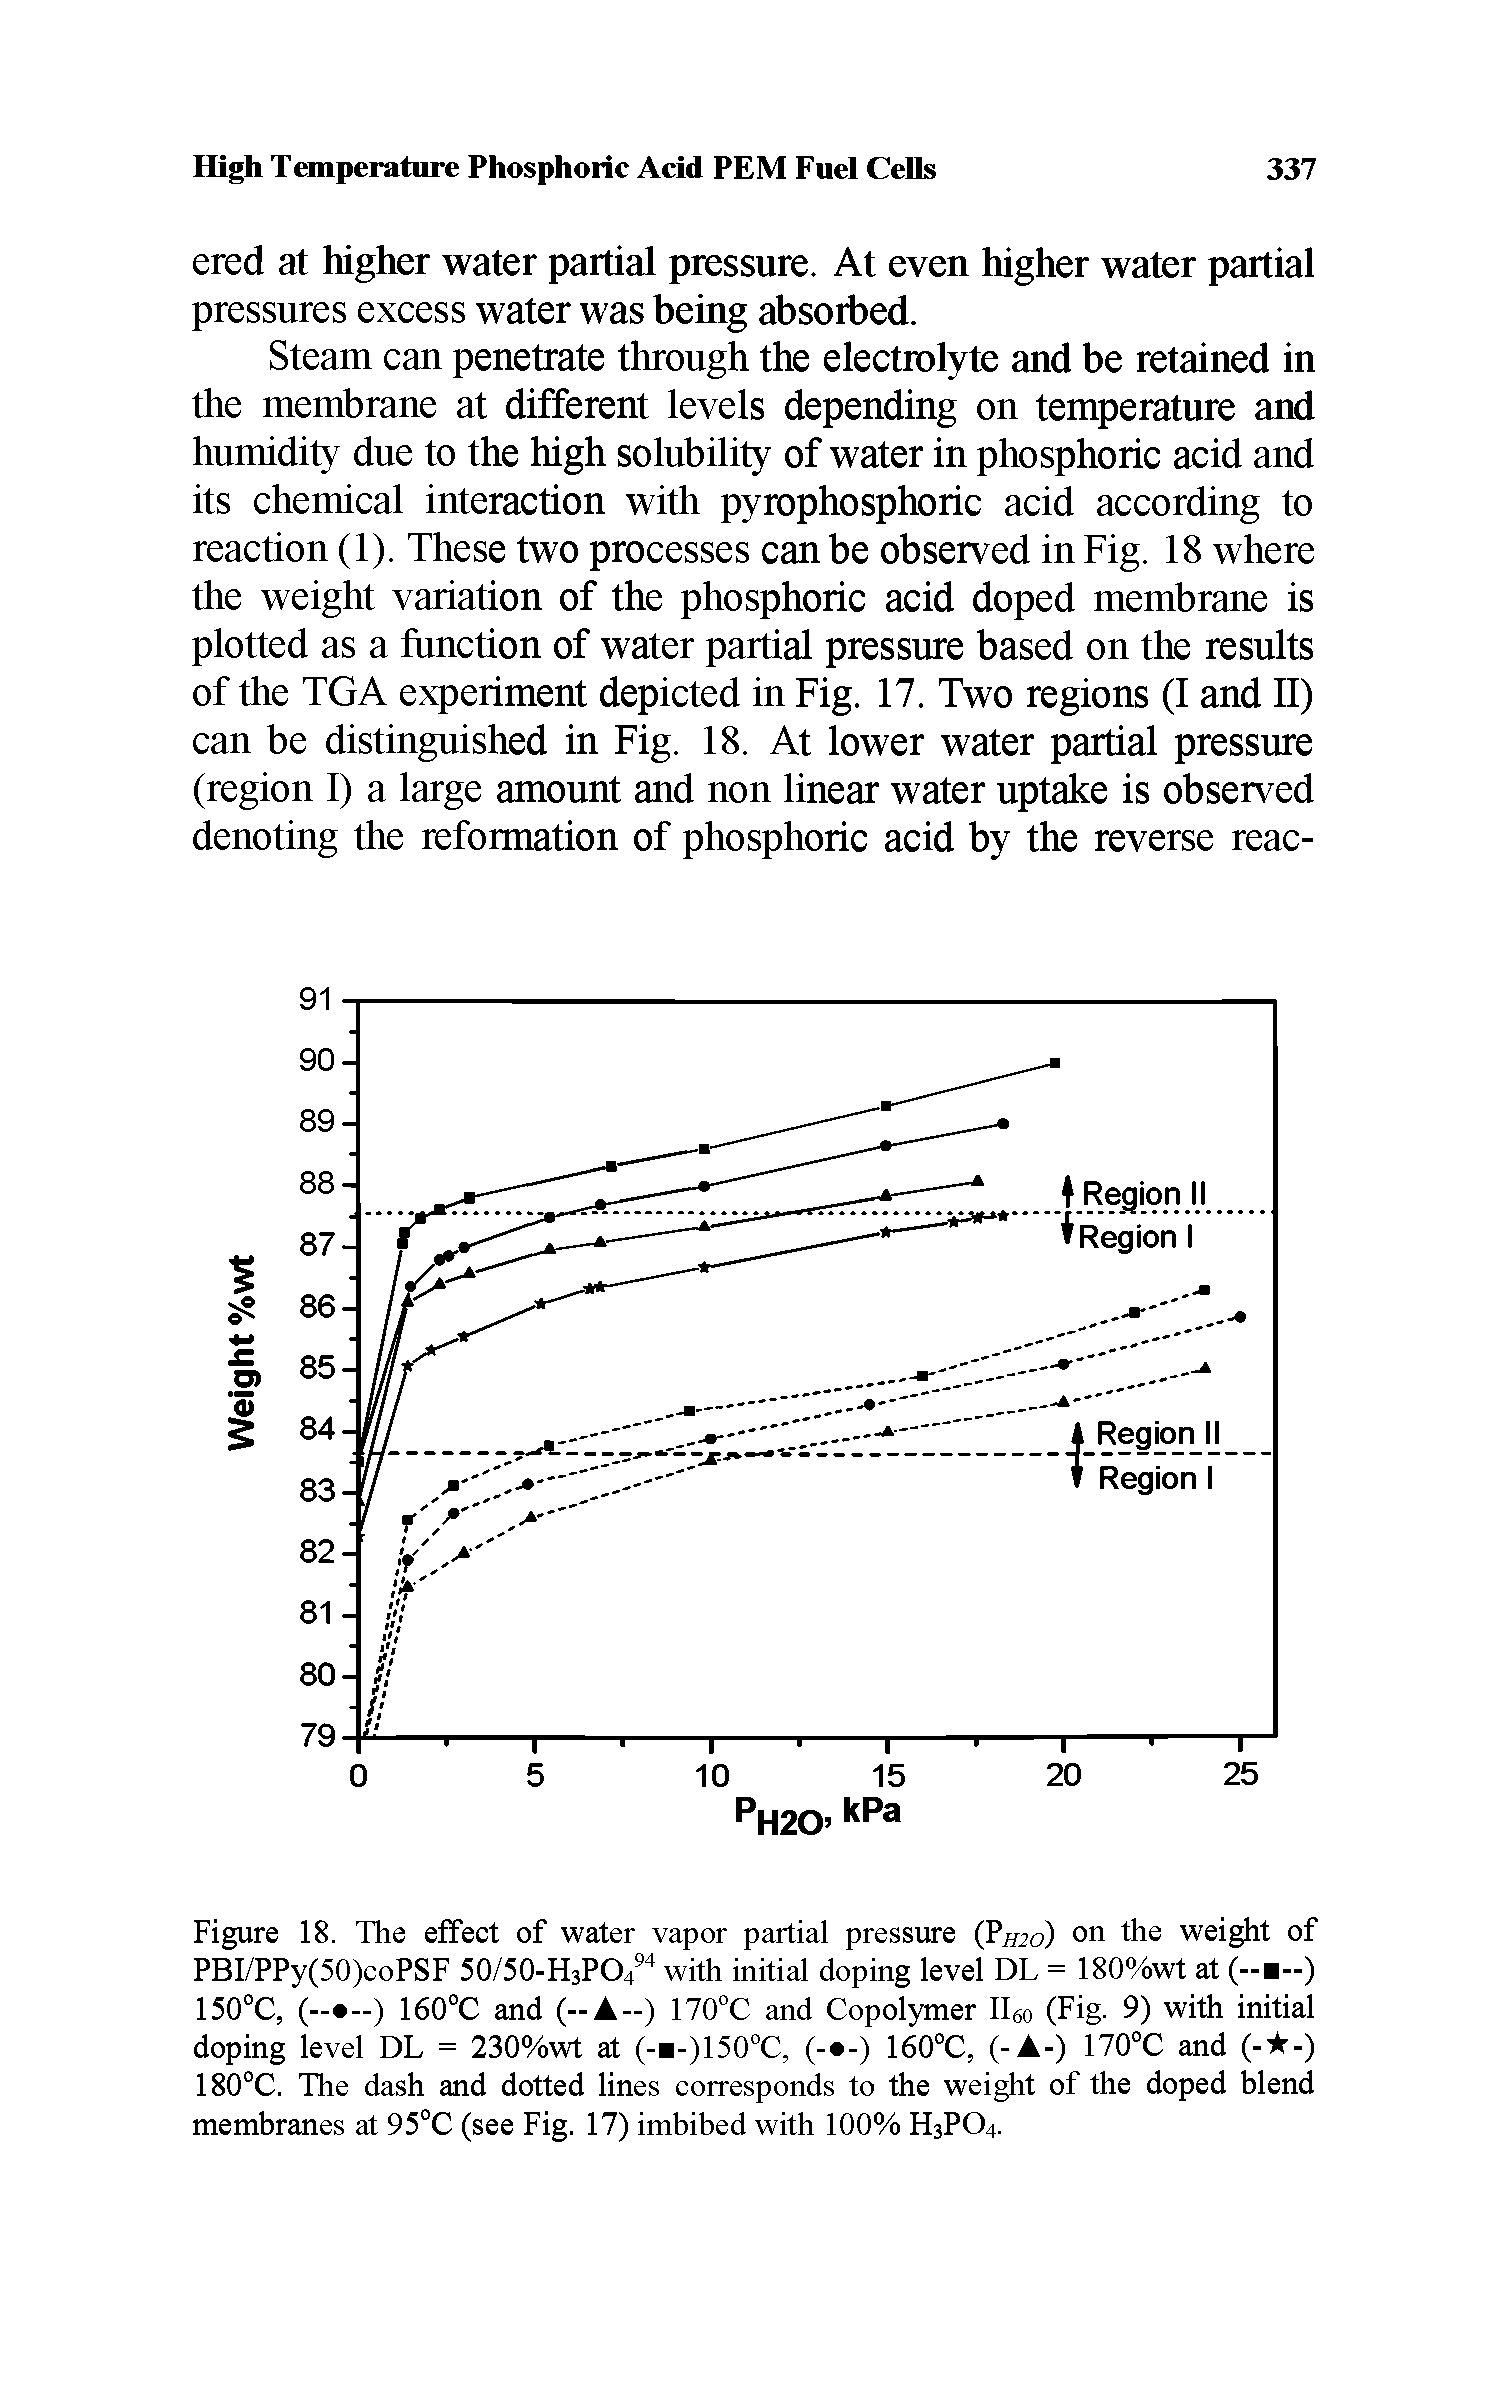 Figure 18. The effect of water vapor partial pressure ( h2o) on the weight of PBI/PPy(50)coPSF SO/SO-HaPO/ with initial doping level DL = 180%wt at (— —) 150°C, (— —) 160°C and (—A—) 170°C and Copolymer ll6o (Fig. 9) with initial doping level DL = 230%wt at (-u-)150°C, (- -) 160°C, (-A-) 170°C and (- -) 180°C. The dash and dotted lines corresponds to the weight of the doped blend membranes at 95°C (see Fig. 17) imbibed with 100% H3PO4.